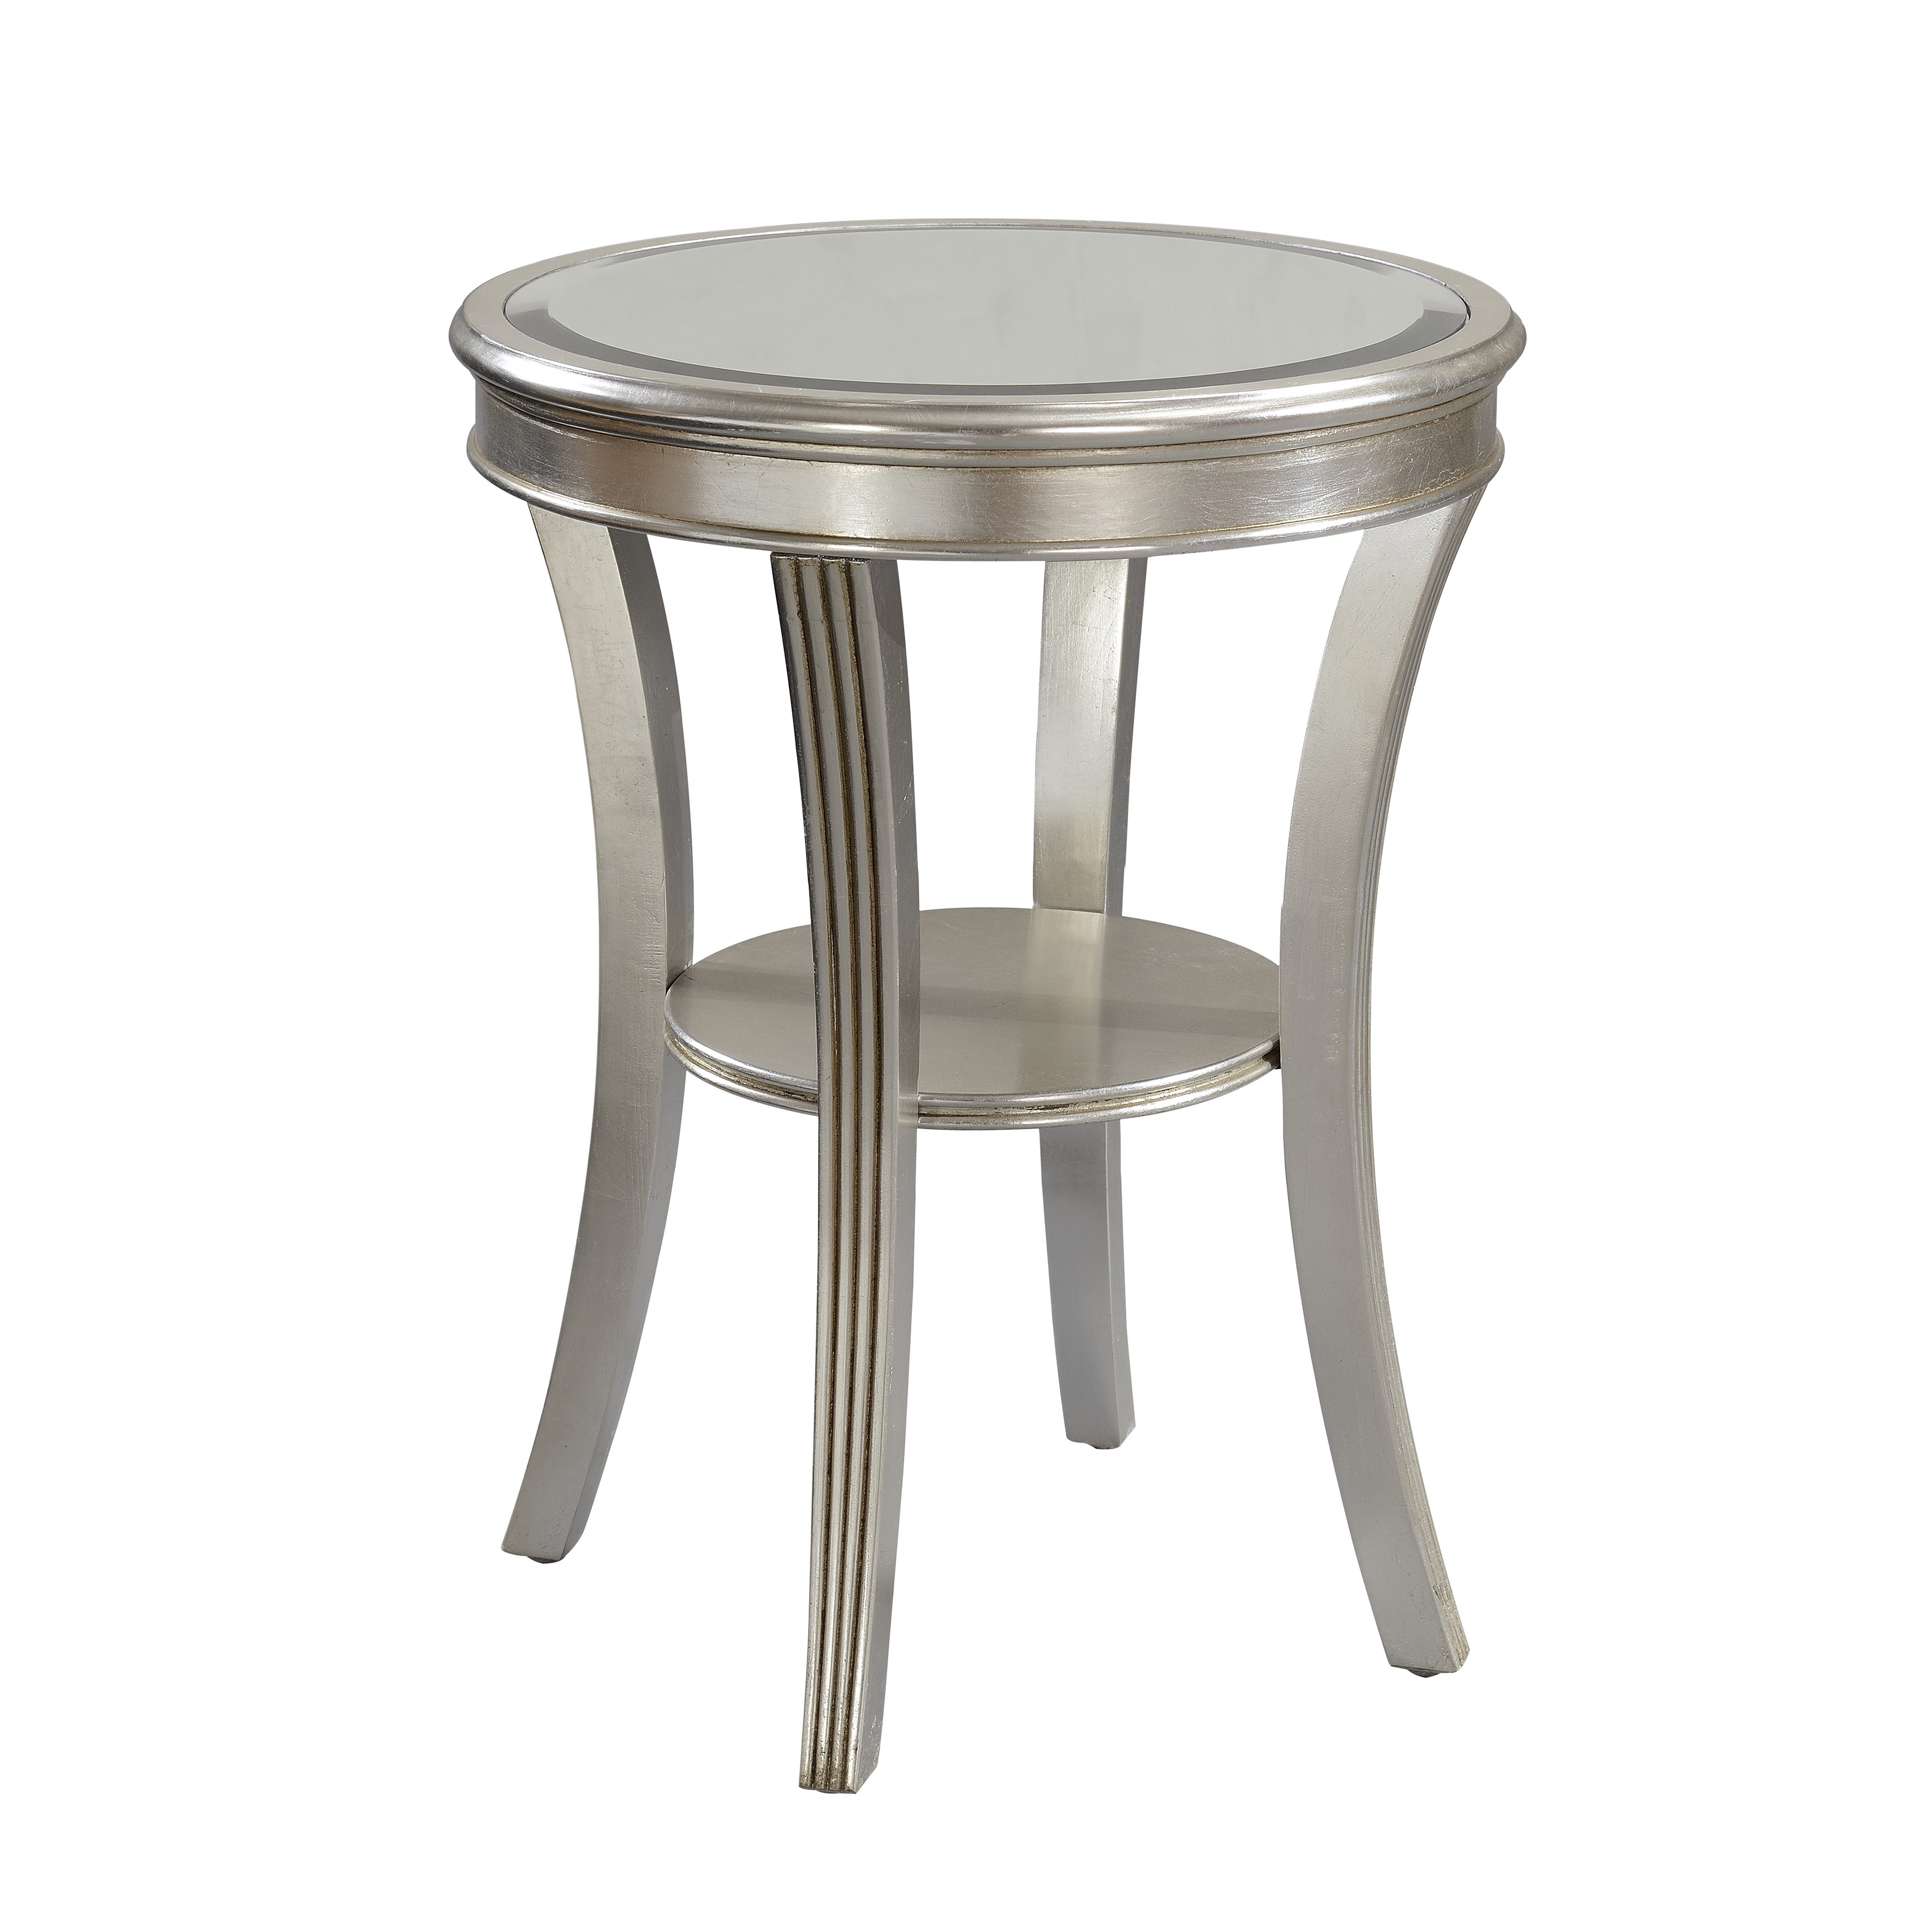 christopher knight home round silver accent table free with screw legs shipping today black metal and wood coffee patio side tables leather sofa mid century dresser outdoor drink